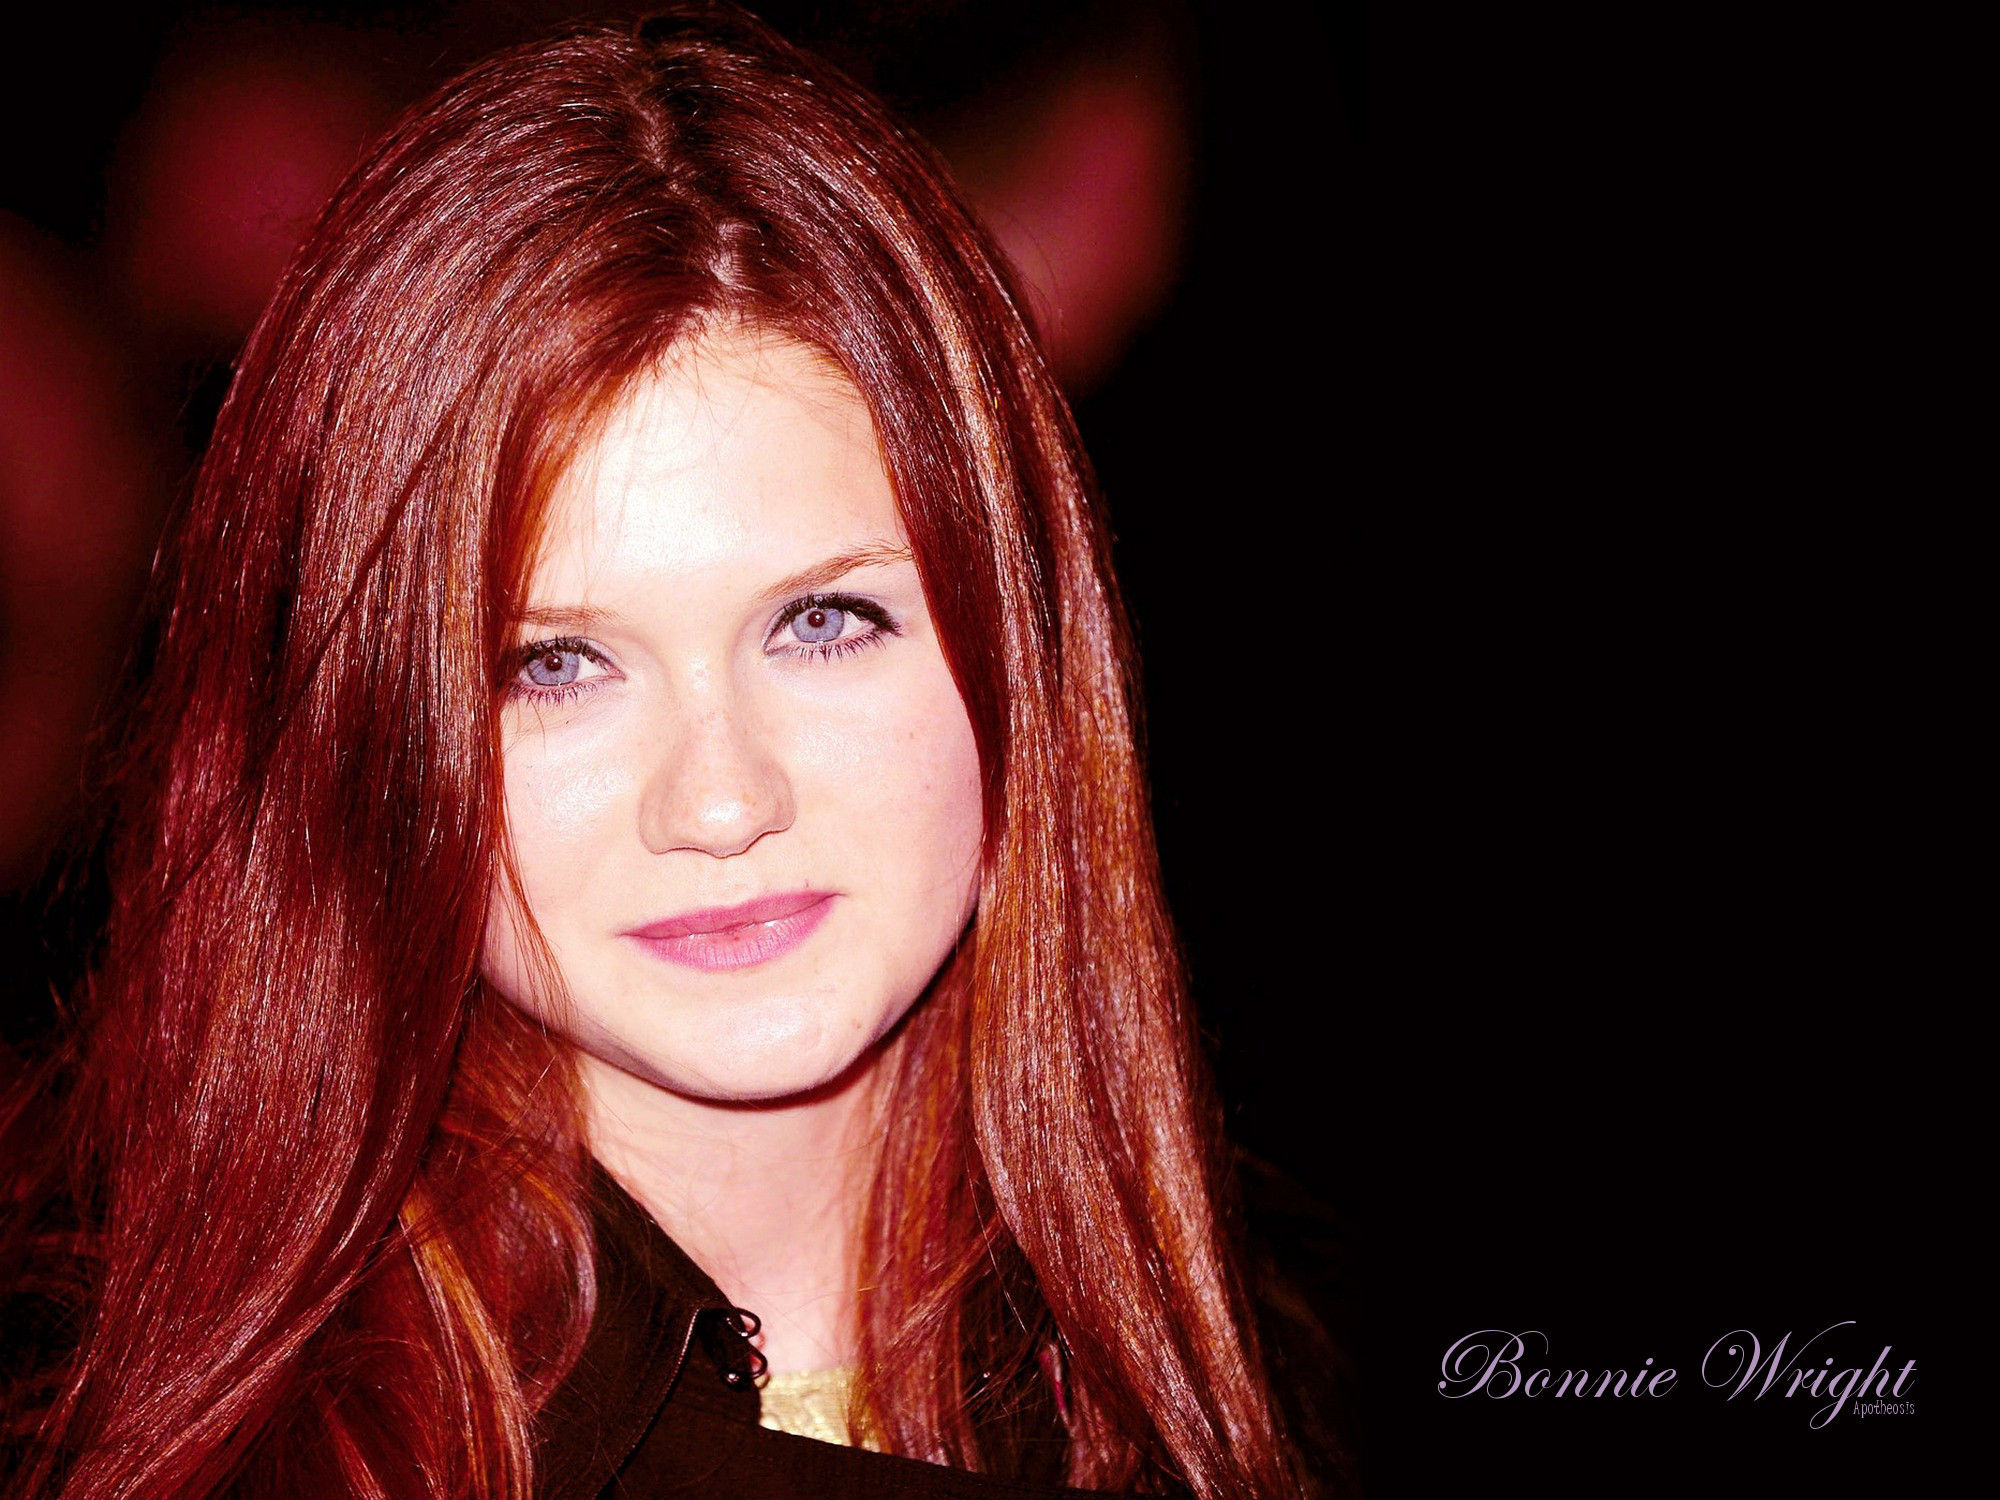 2000x1500 Bonnie Wright Wallpapers | Daily inspiration art photos, pictures and  wallpapers